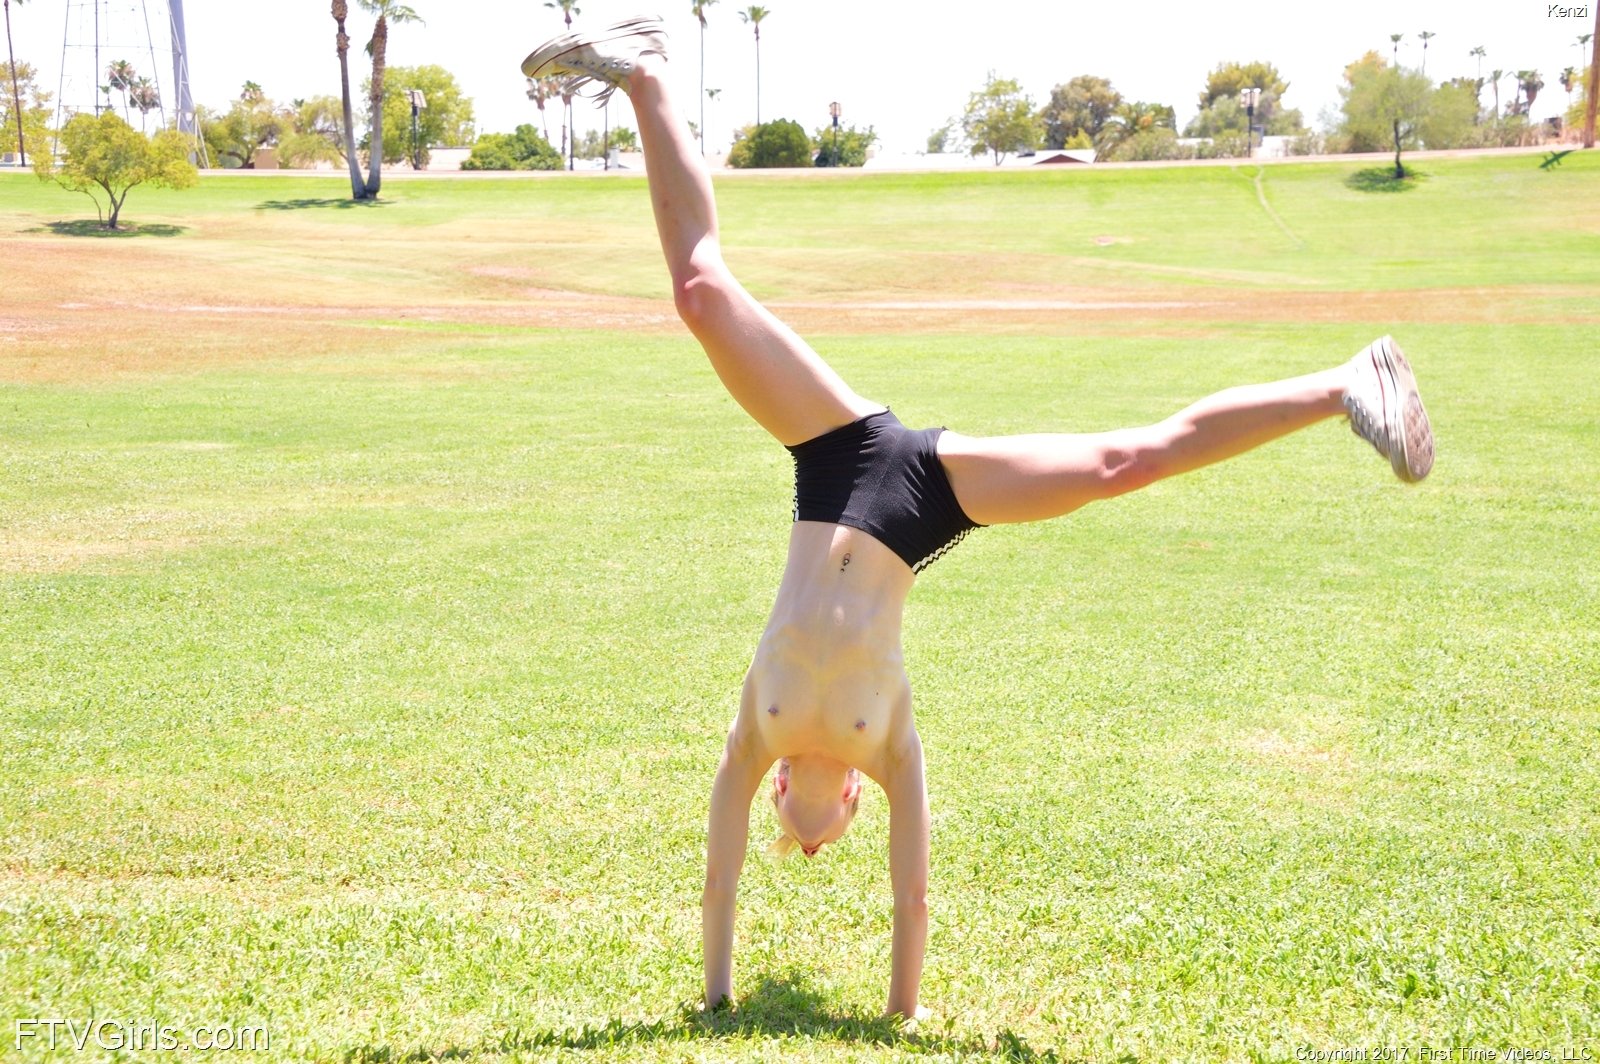 Gymnast hottie doing cartwheels, fucking an exercise bike, and more - FTV G...